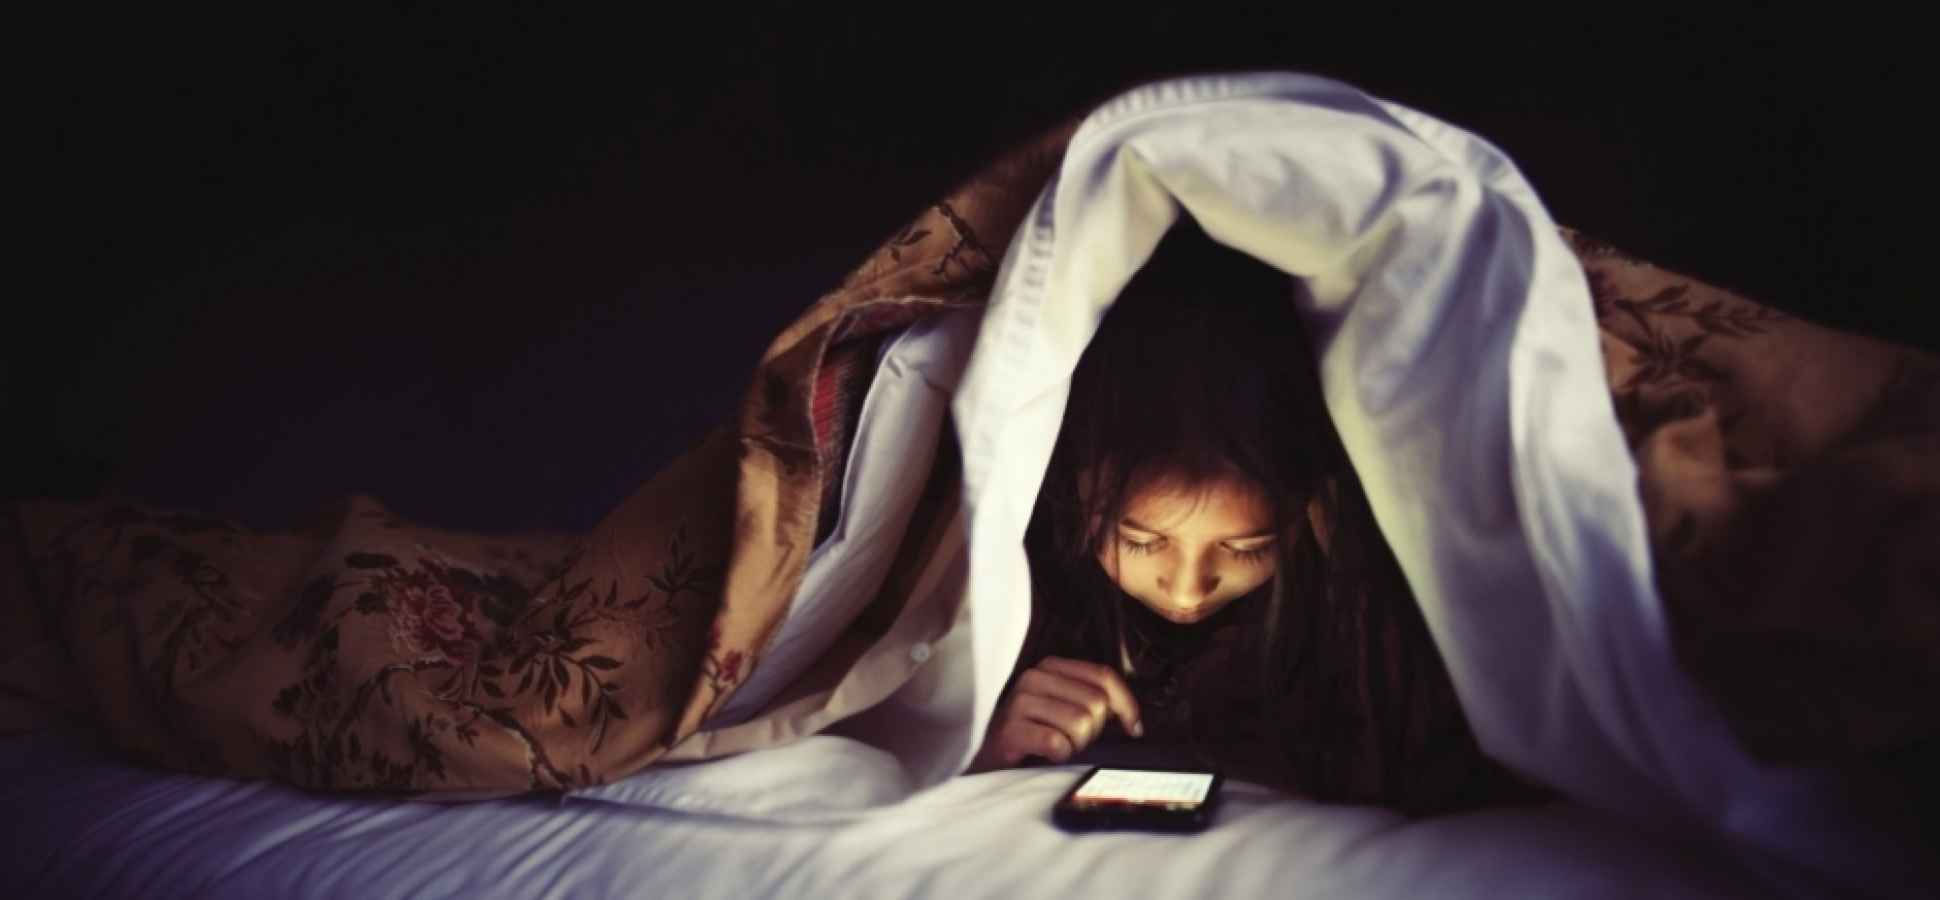 Youngs May Be Losing Sleep Over Social Media : More LOLs, Fewer Zzzs